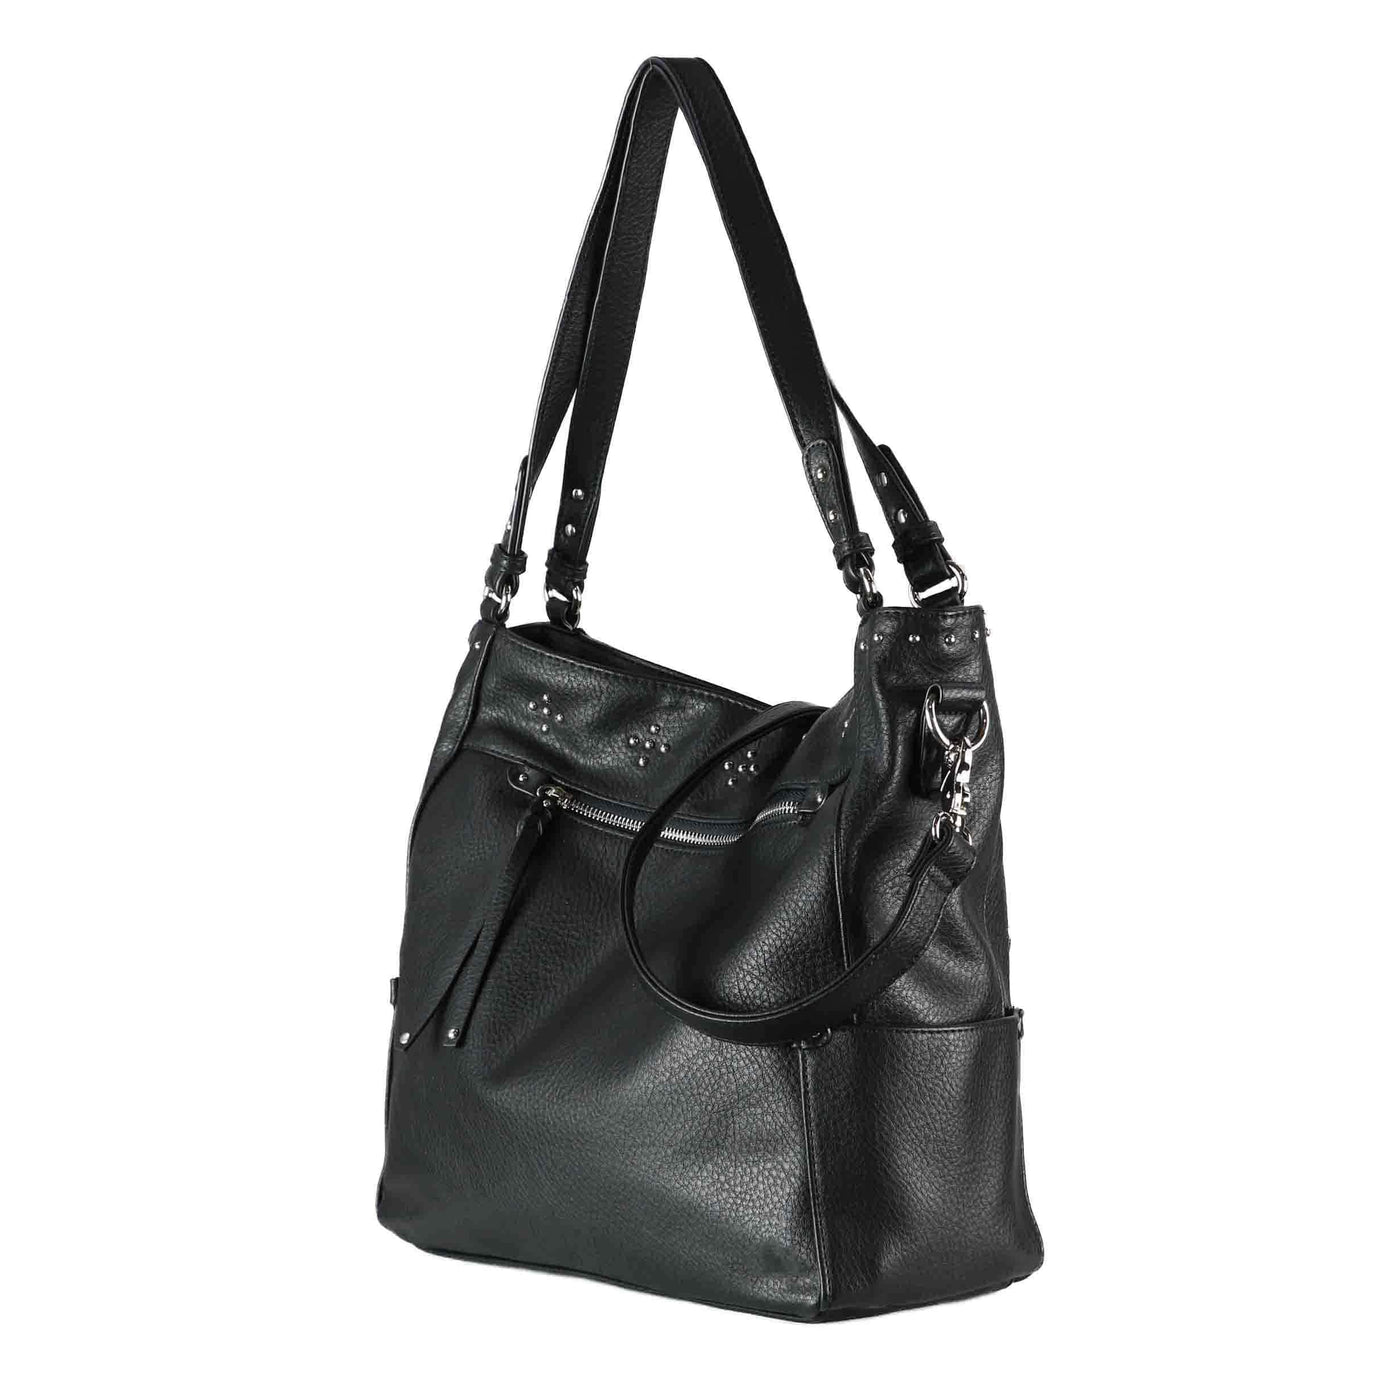 Lady Conceal Concealed Carry Purse Mahogany Concealed Carry Brooklyn Tote Bag - Black by Lady Conceal